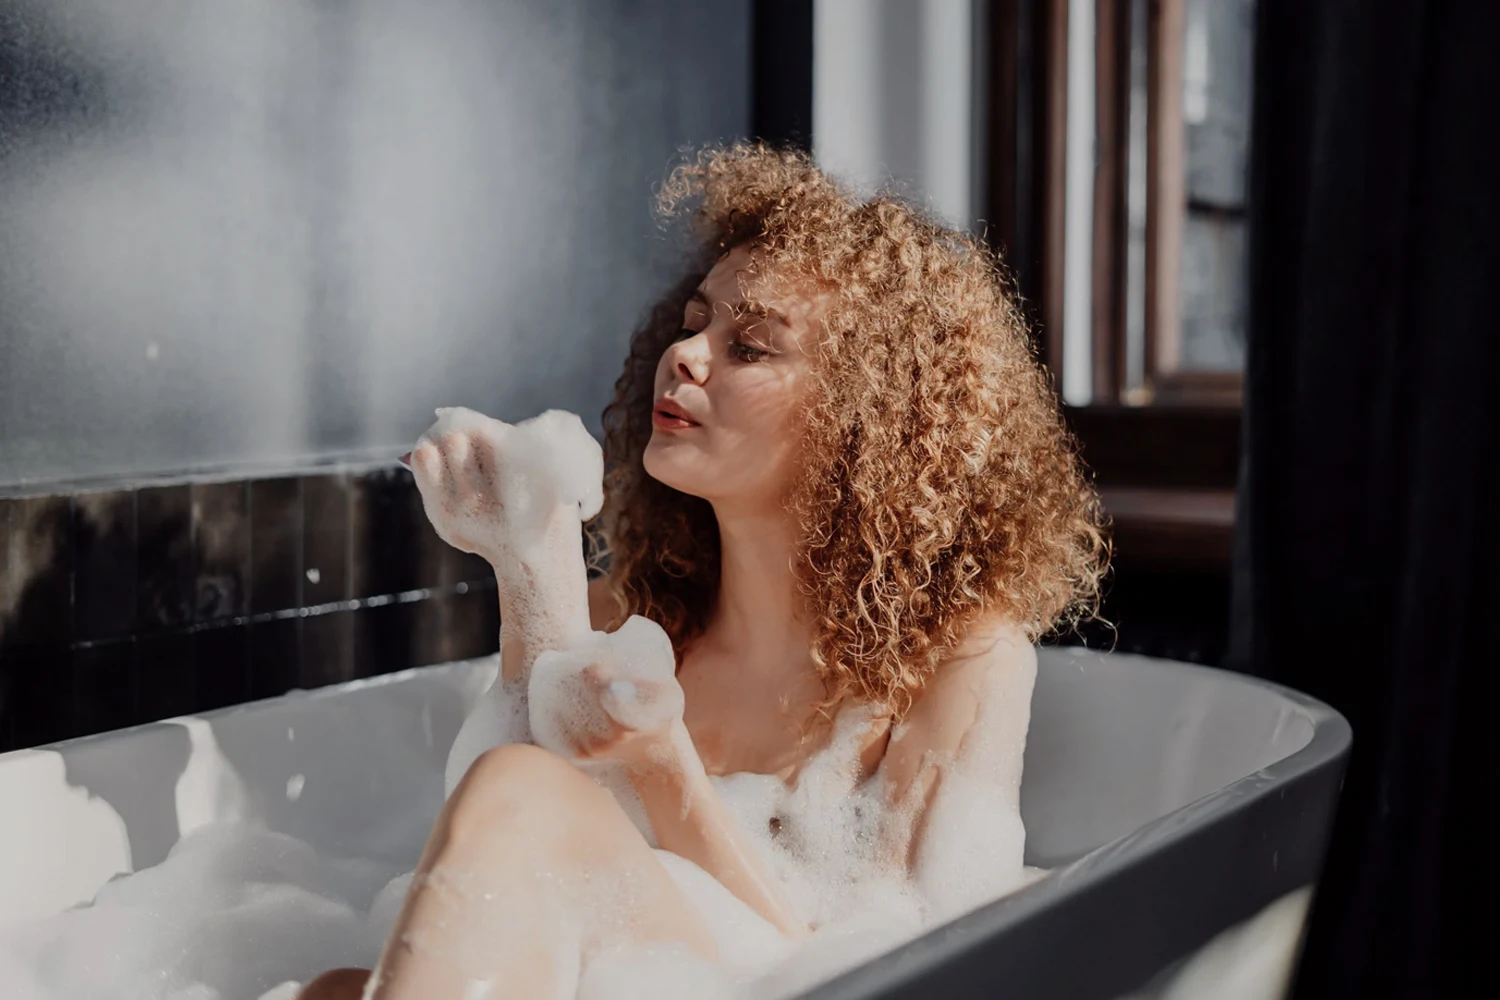 curly woman takes bubble bath and poses for the camera